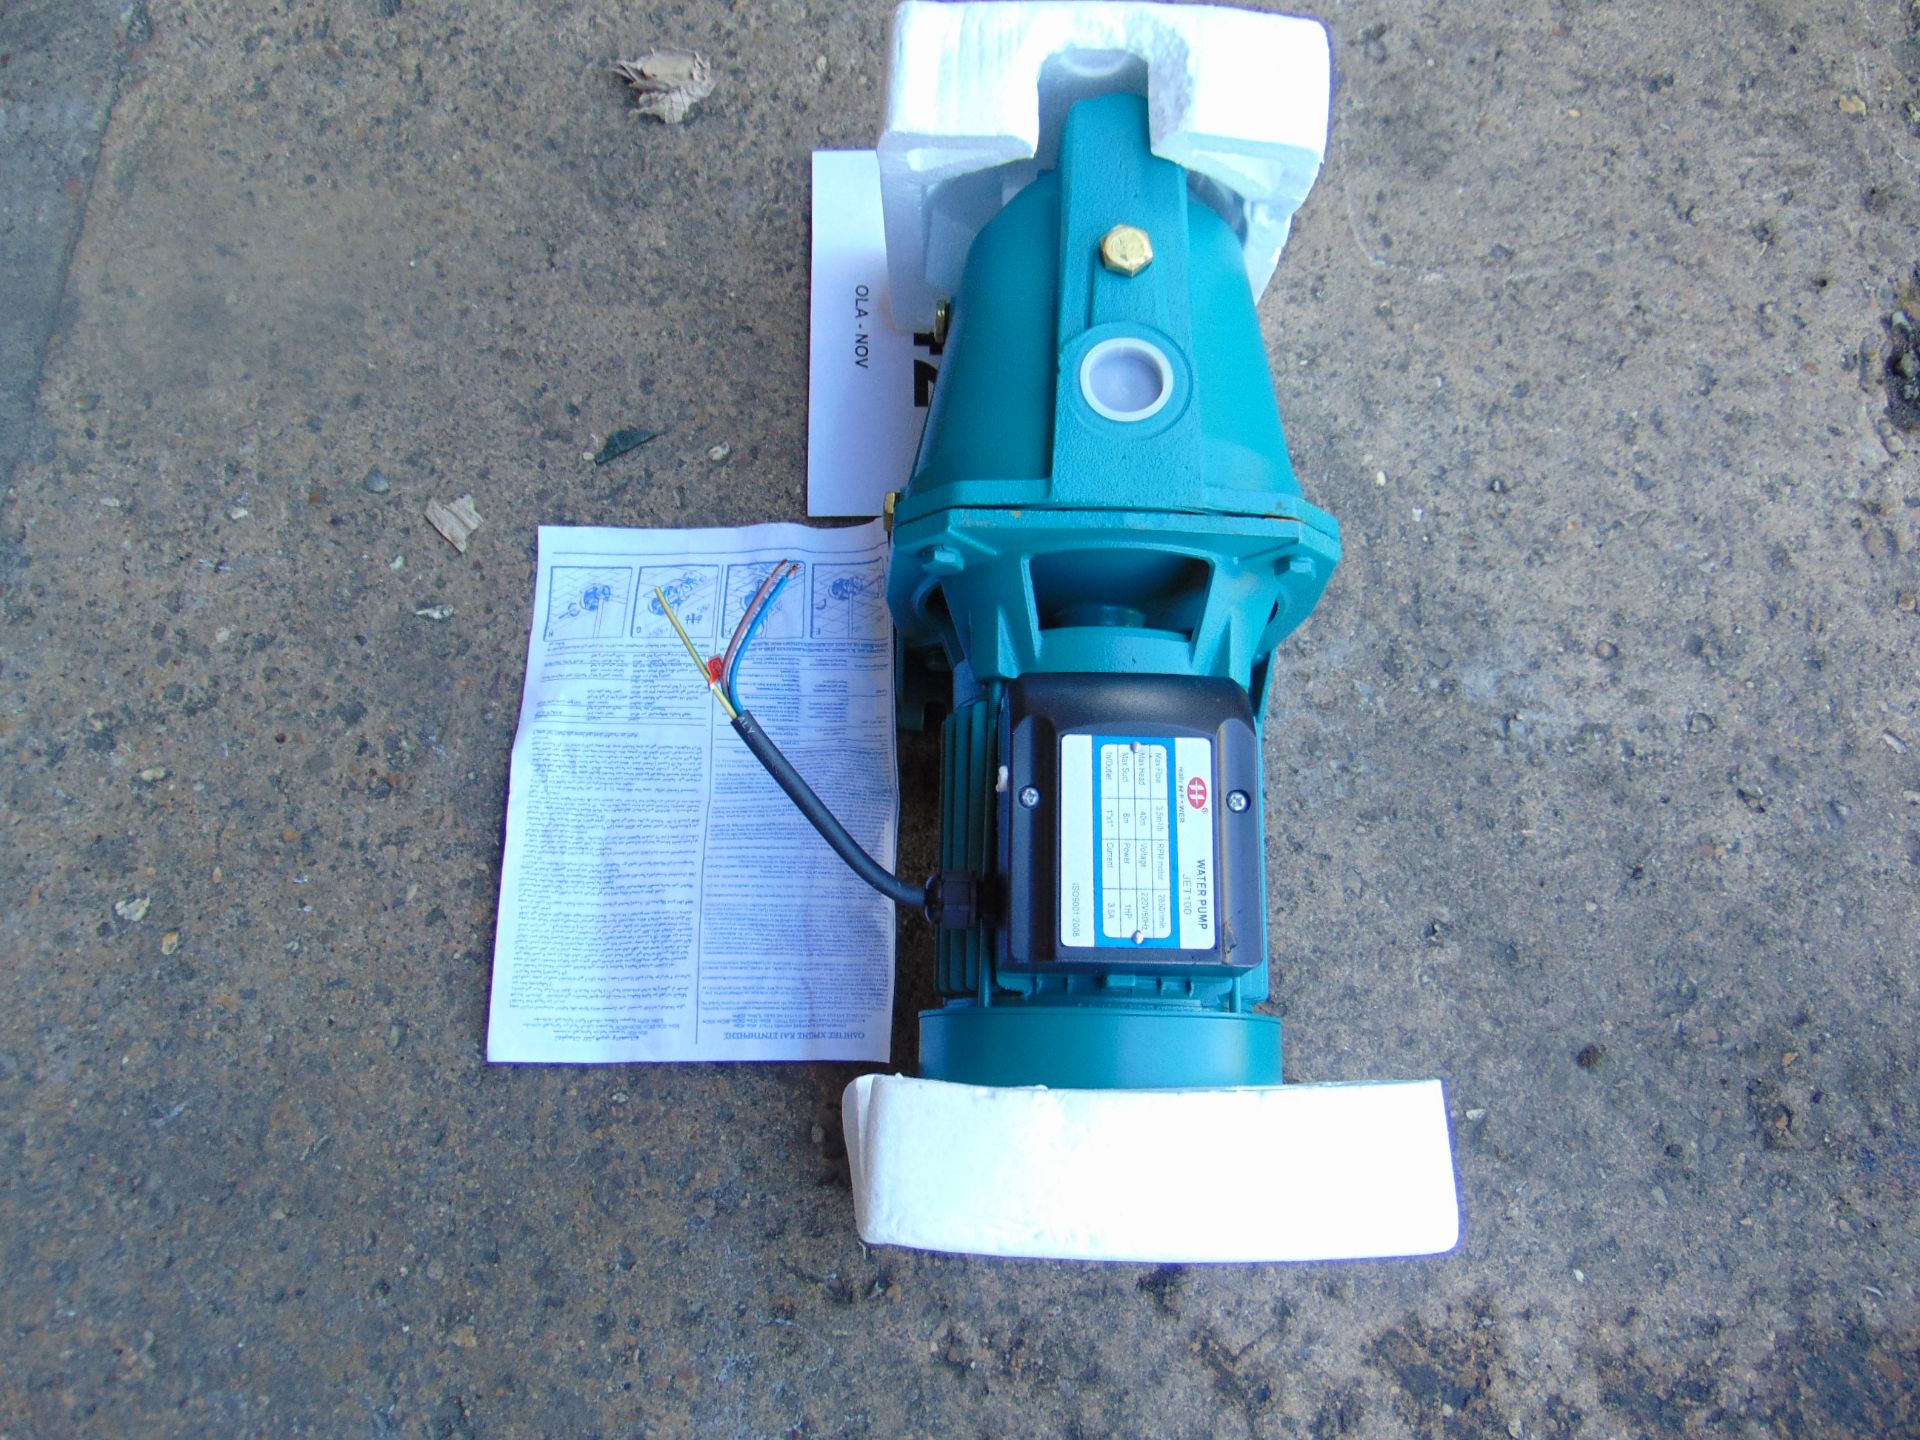 New Unused 240 Volt Jet 100 Water Pump c/w Instructions as shown - Image 3 of 6